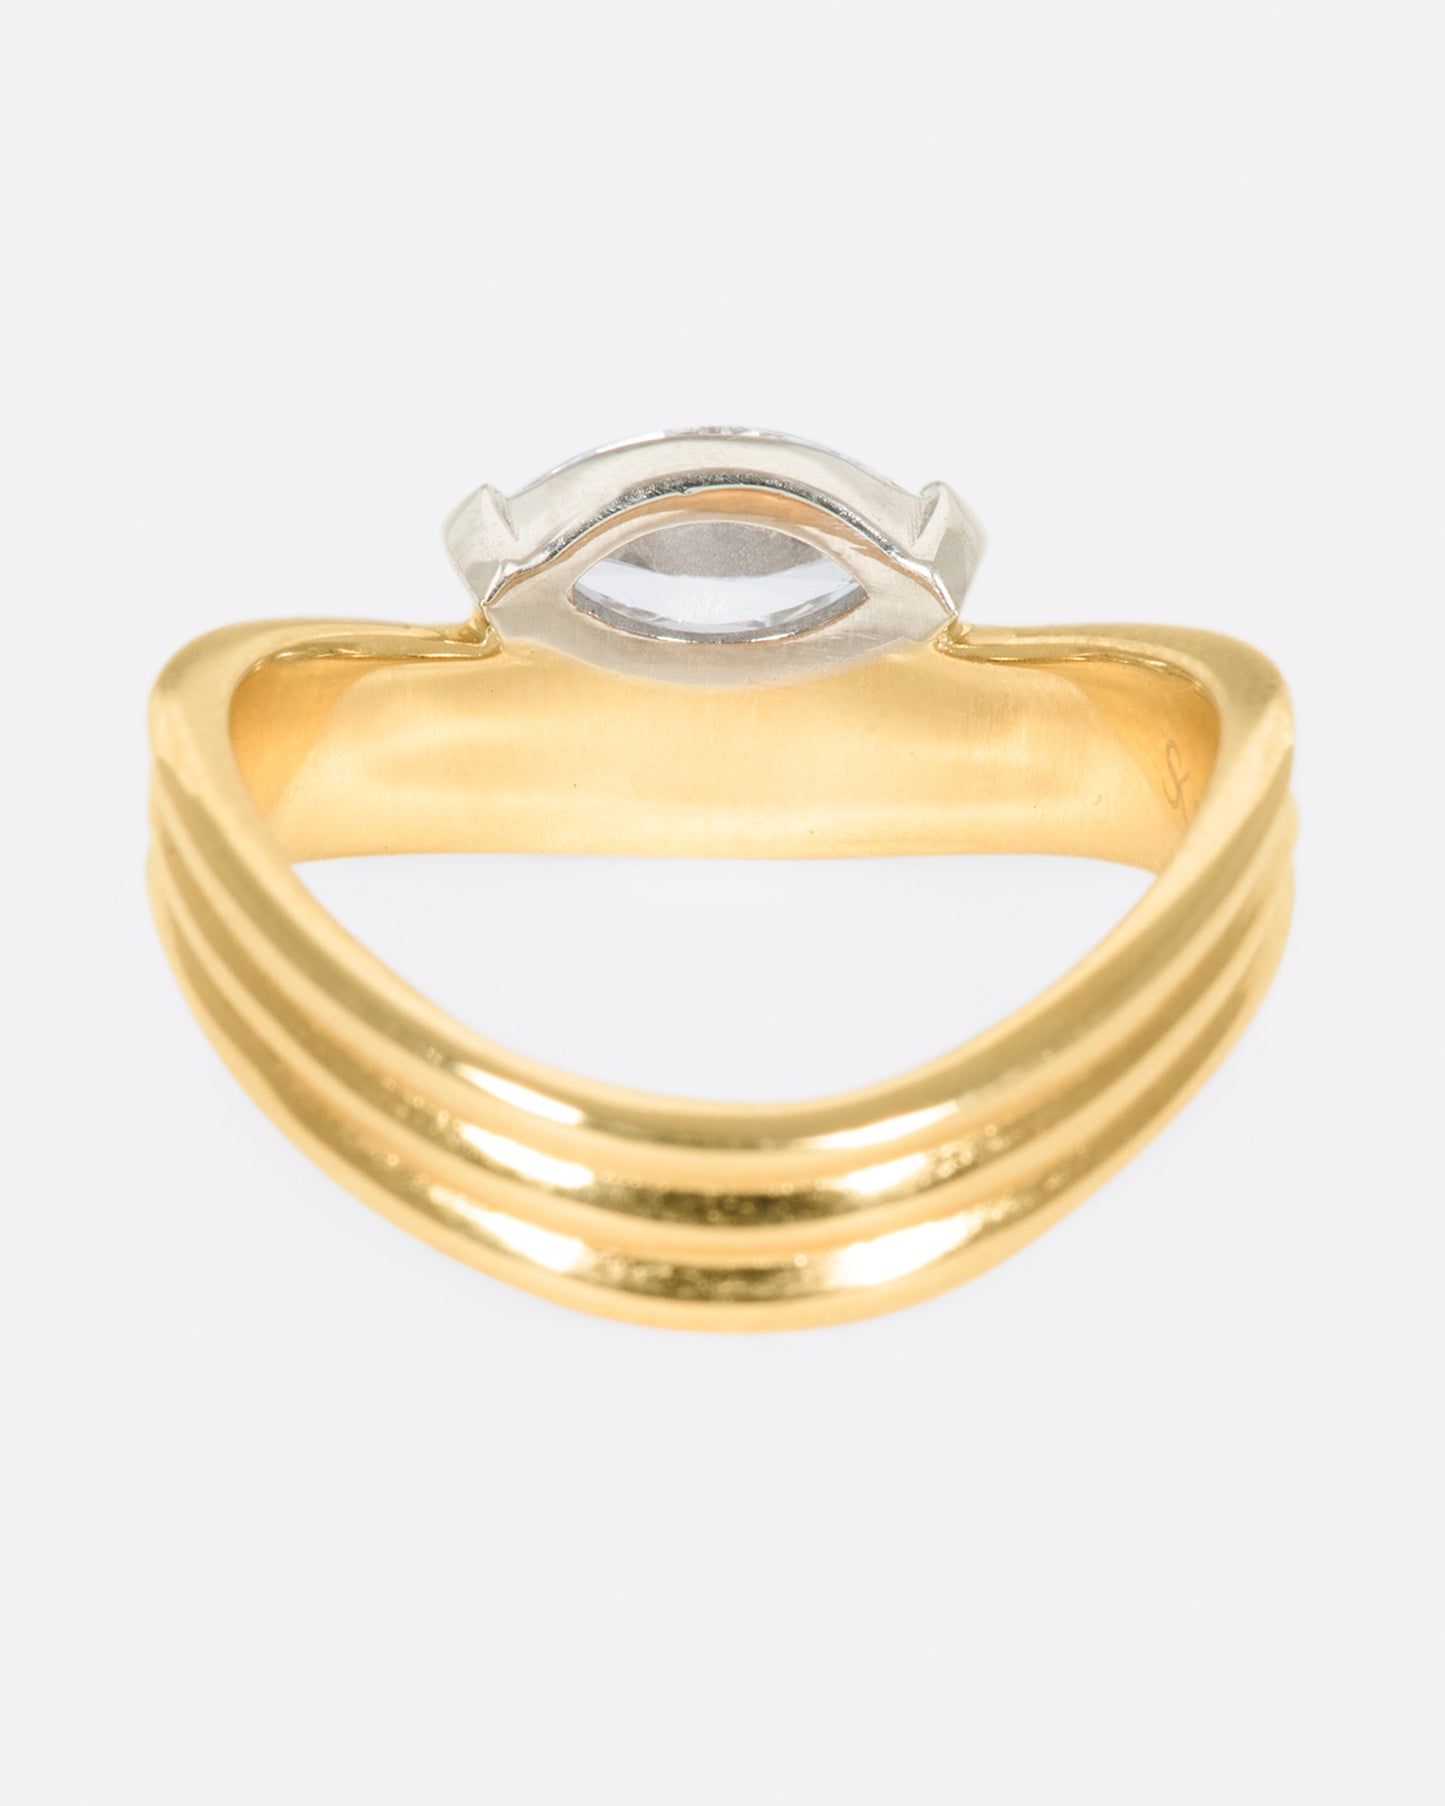 A marquise diamond is nestled into the curve of this banded ring, which sits comfortably around the base of the finger.